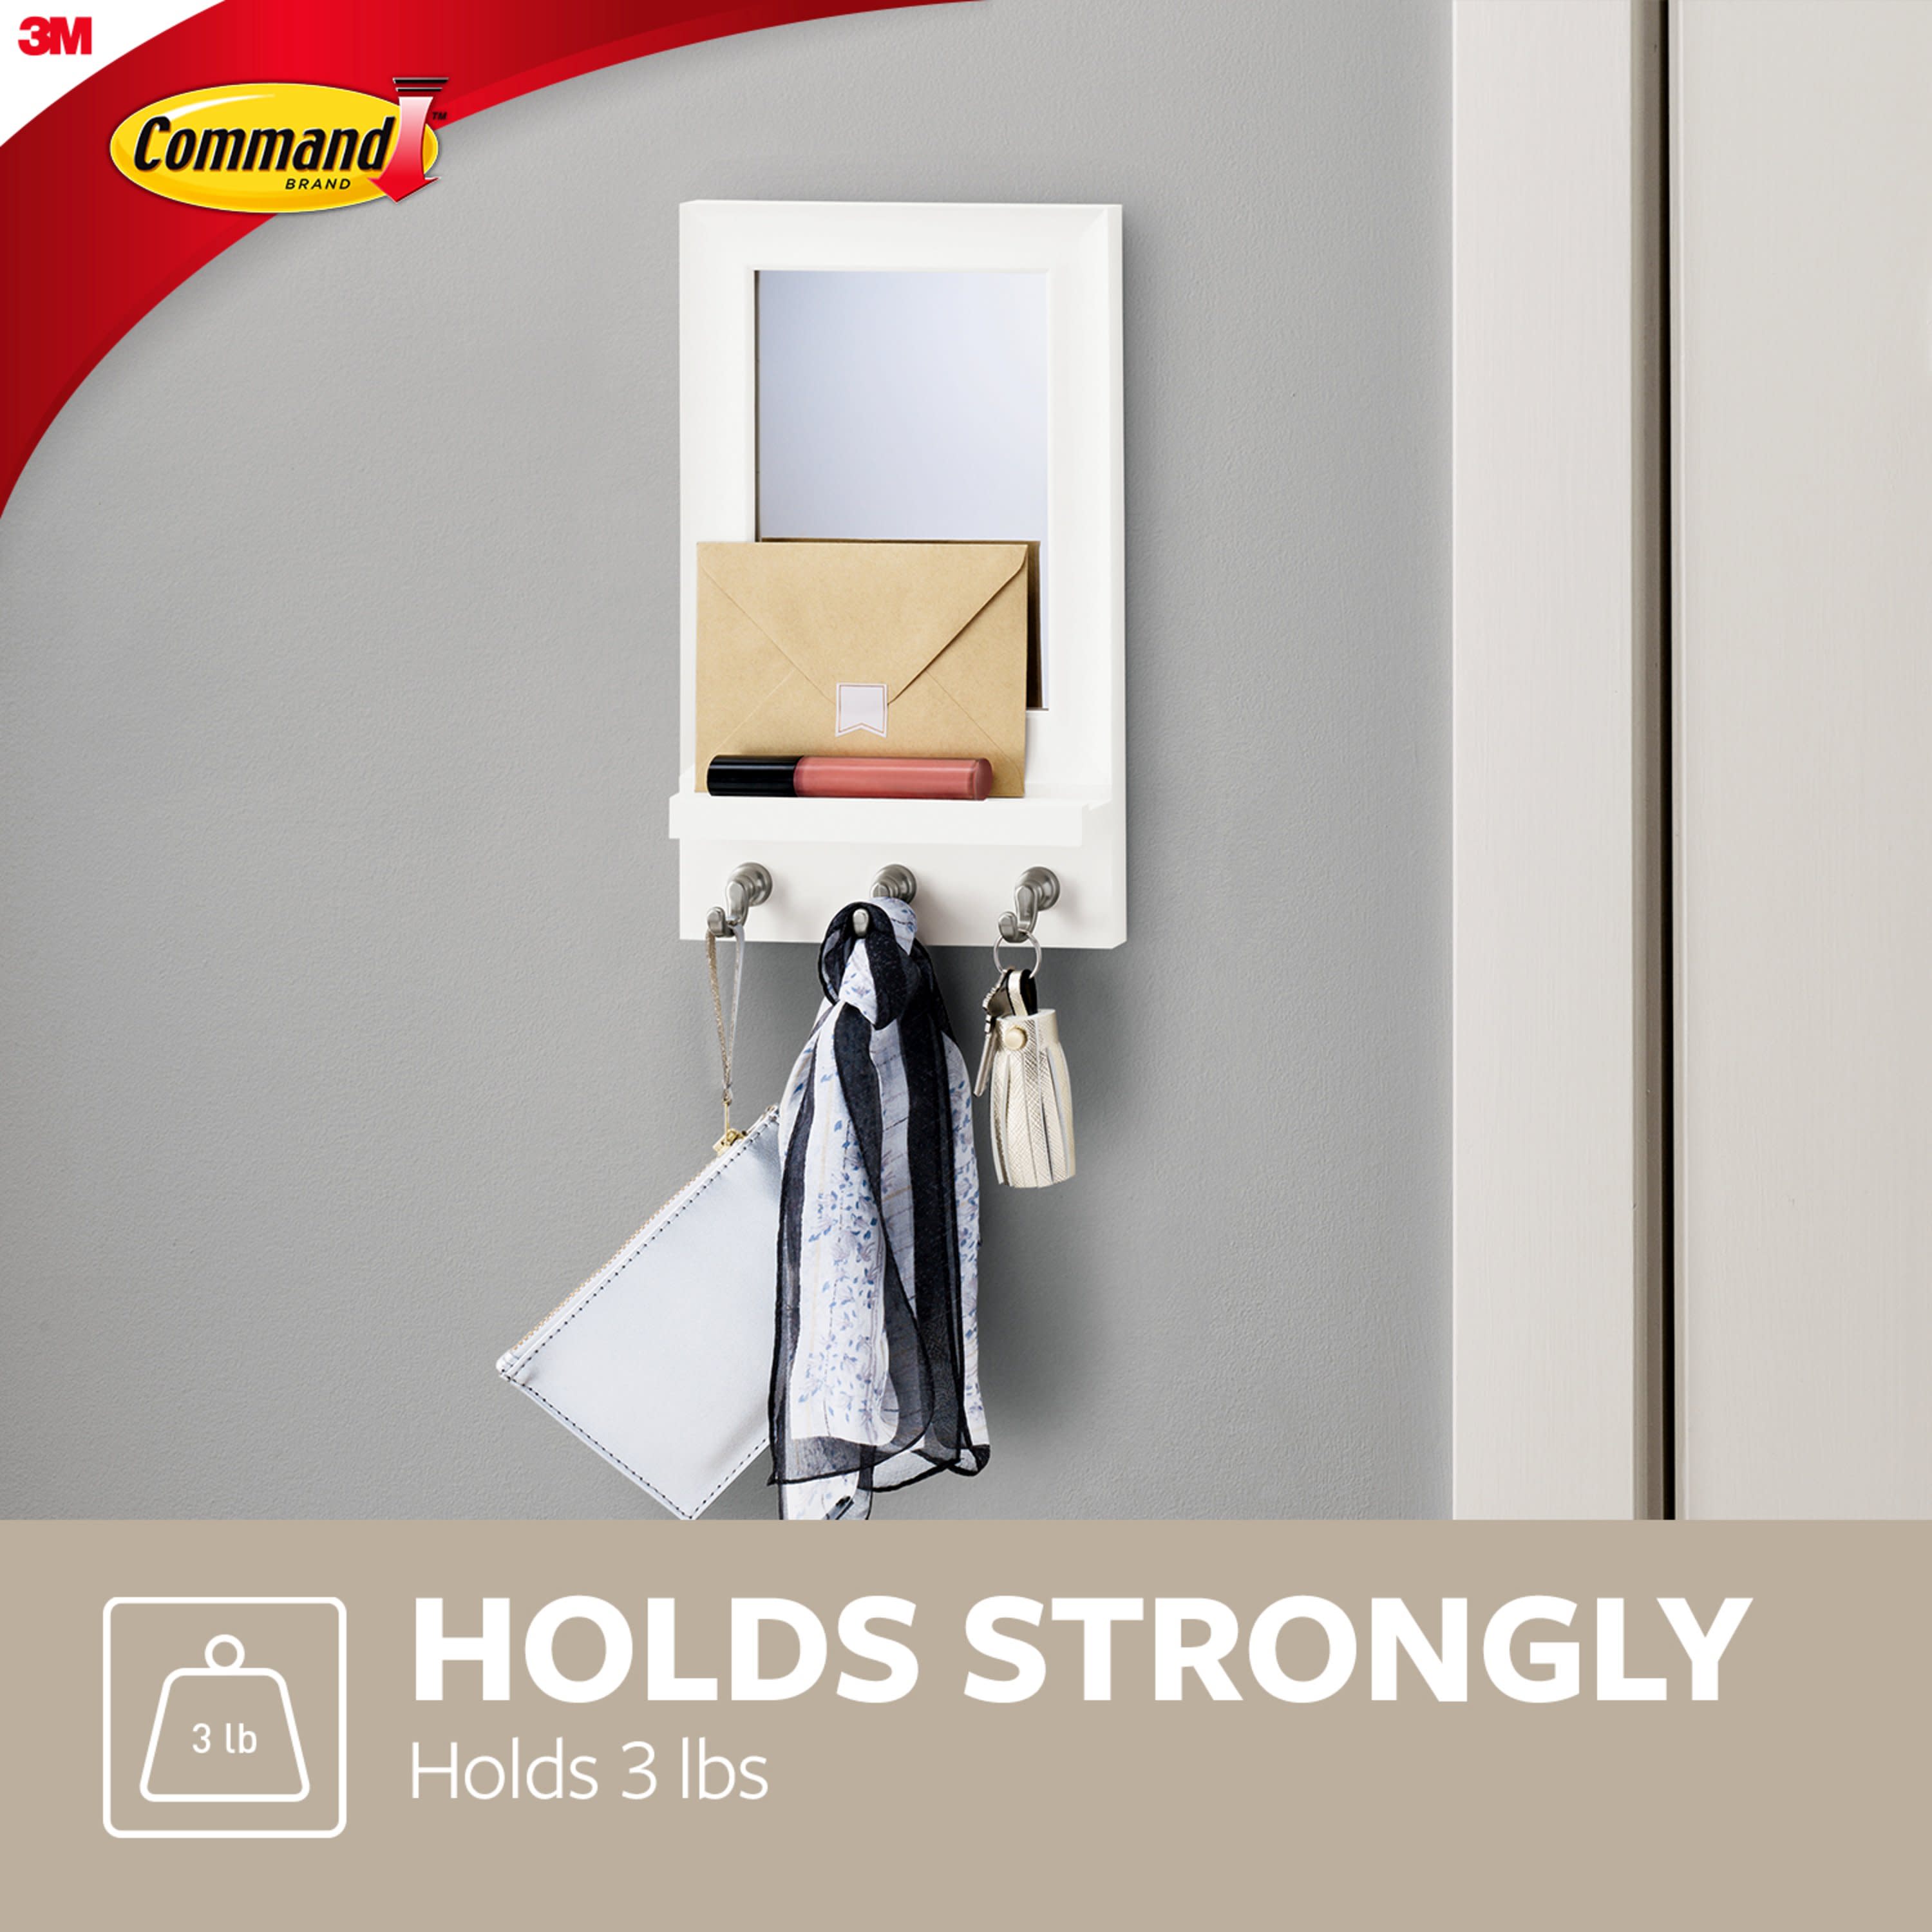 Command Shower Caddy Hanger Frosted Adhesive Bath Hook(7.5-lb Capacity) in  the Utility Hooks & Racks department at